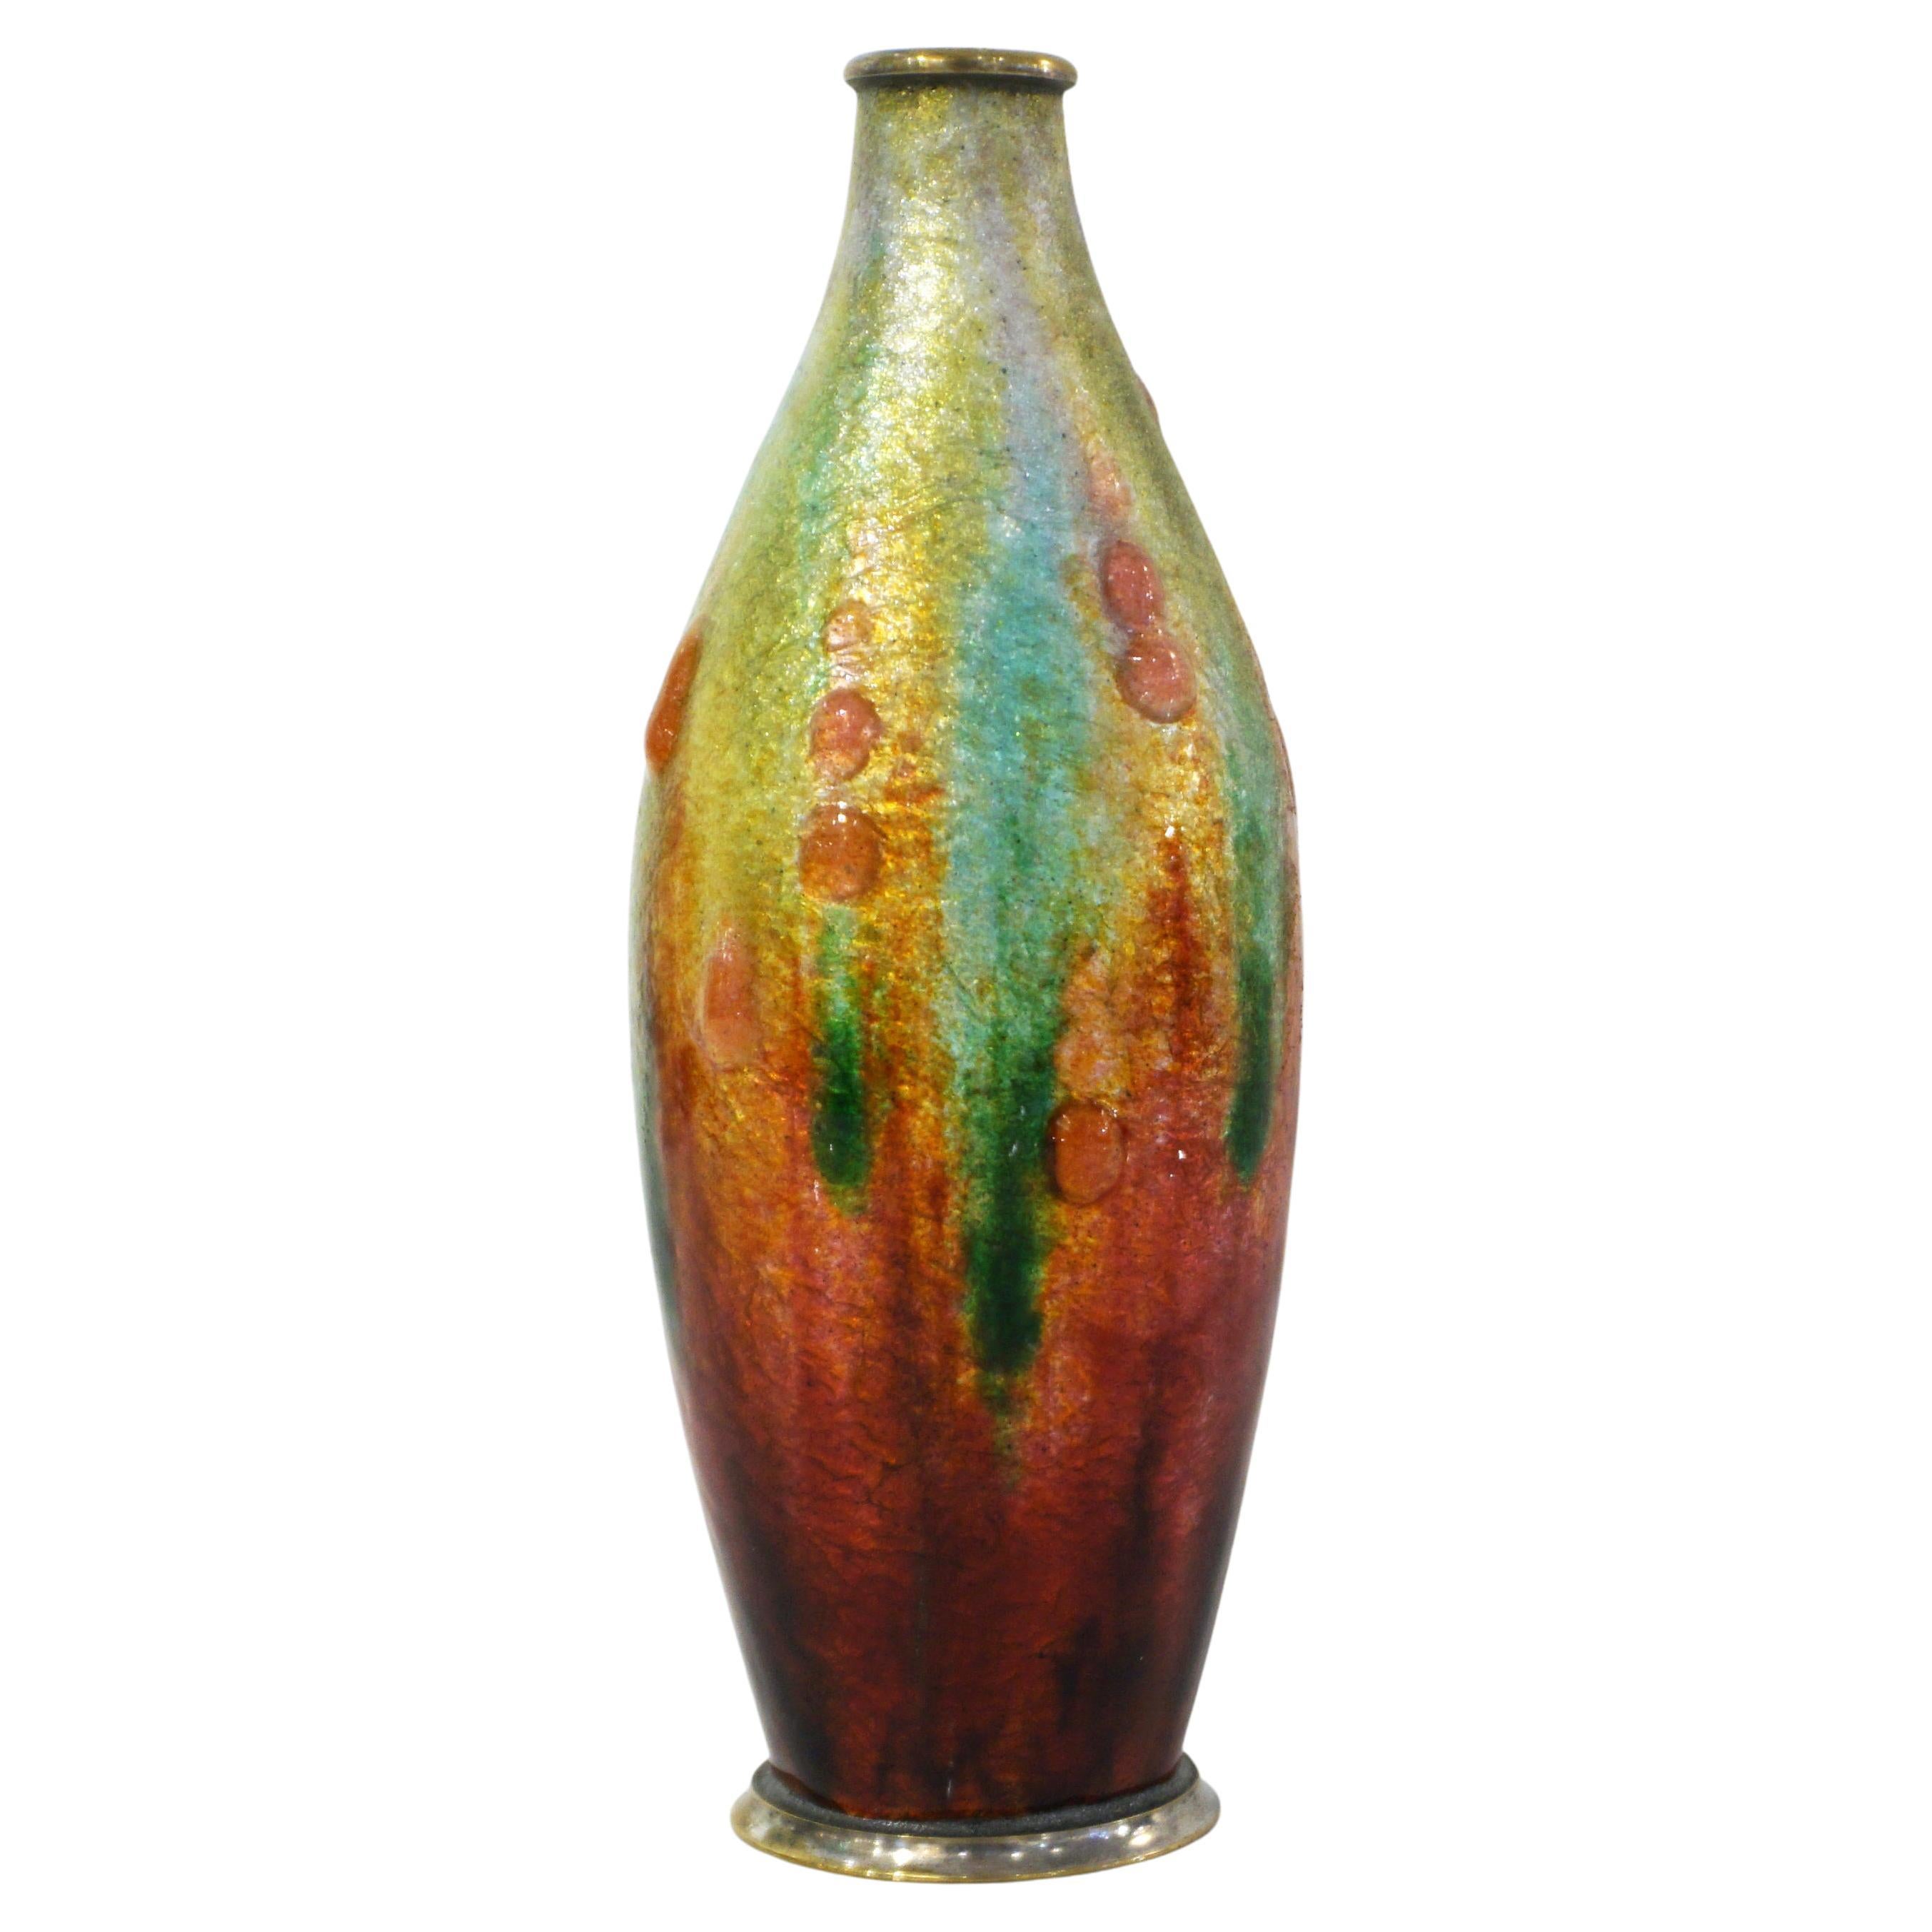 Camille Faure Art Nouveau French Limoges Yellow Green Red Enamels Copper Vase For Sale